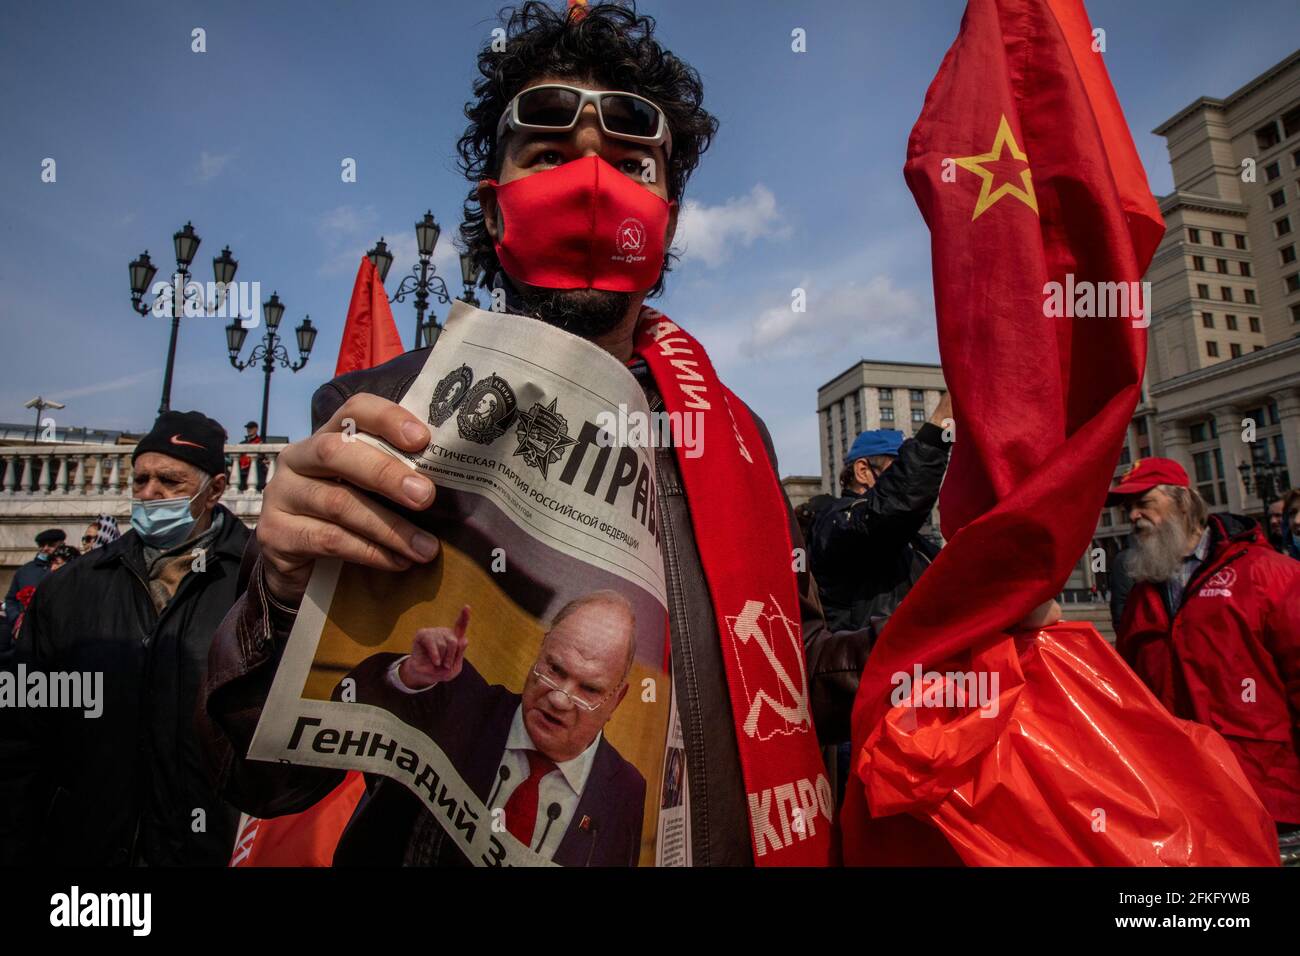 Moscow, Russia. 22nd of April, 2021 Communist supporter reads 'Pravda' (Eng: Truth) newspaper at Manegnaya square in central Moscow before visit the Mausoleum of the Soviet founder Vladimir Lenin to mark the 151st anniversary of his birth, Russia. On the front page of the newspaper is a portrait of the Communist Party leader Gennady Zyuganov. The Pravda is Russian broadsheet newspaper, formerly the official newspaper of the Communist Party of the Soviet Union, when it was one of the most influential papers in the country with a circulation of 11 million Stock Photo